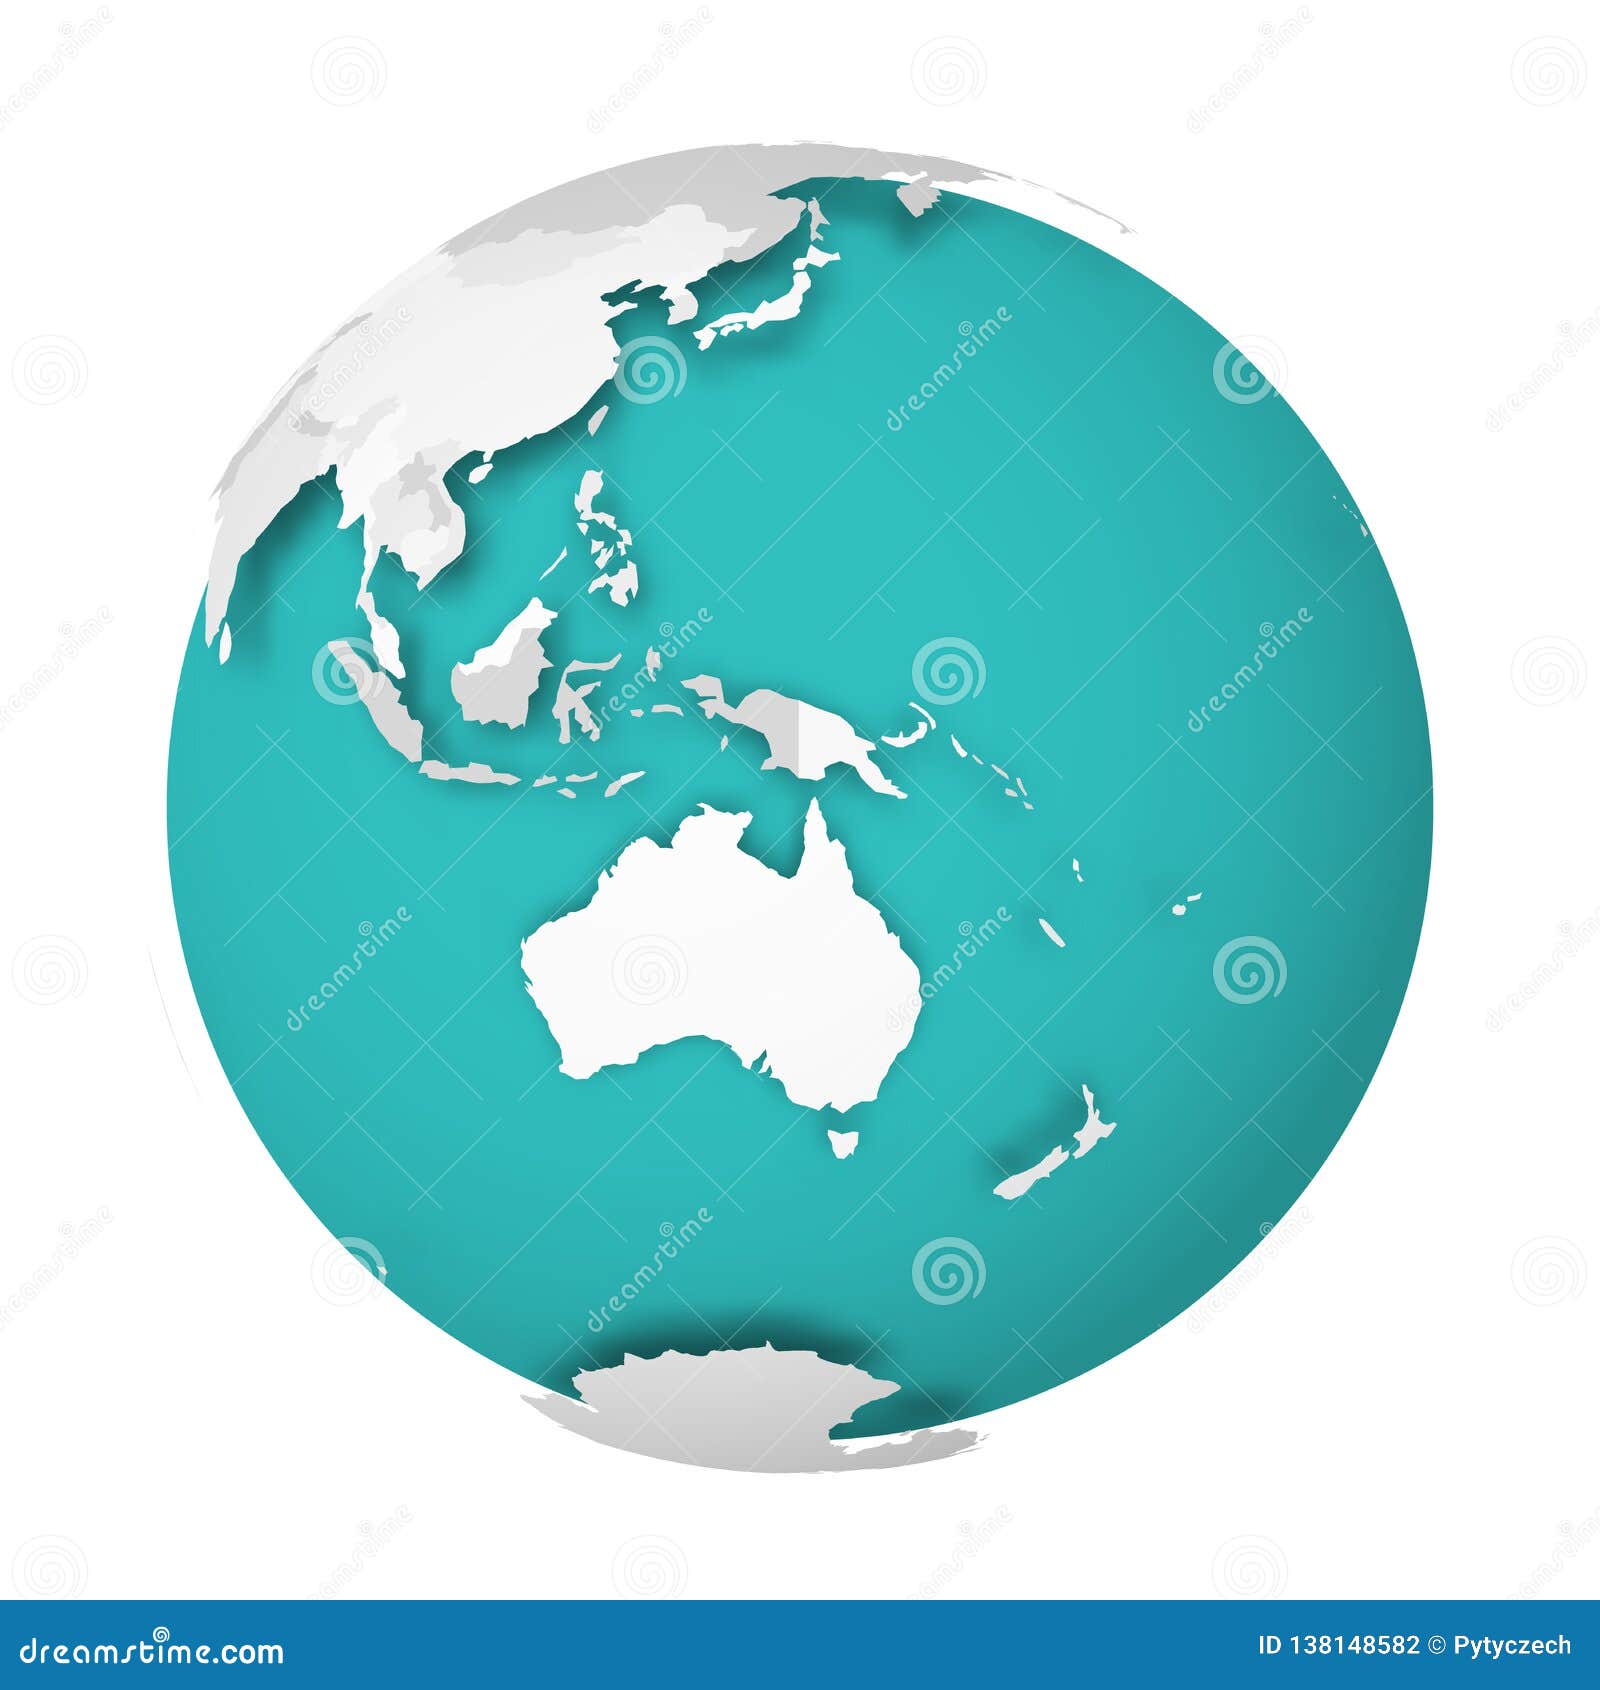 3d Earth Globe With Blank Political Map Dropping Shadow On Blue Green